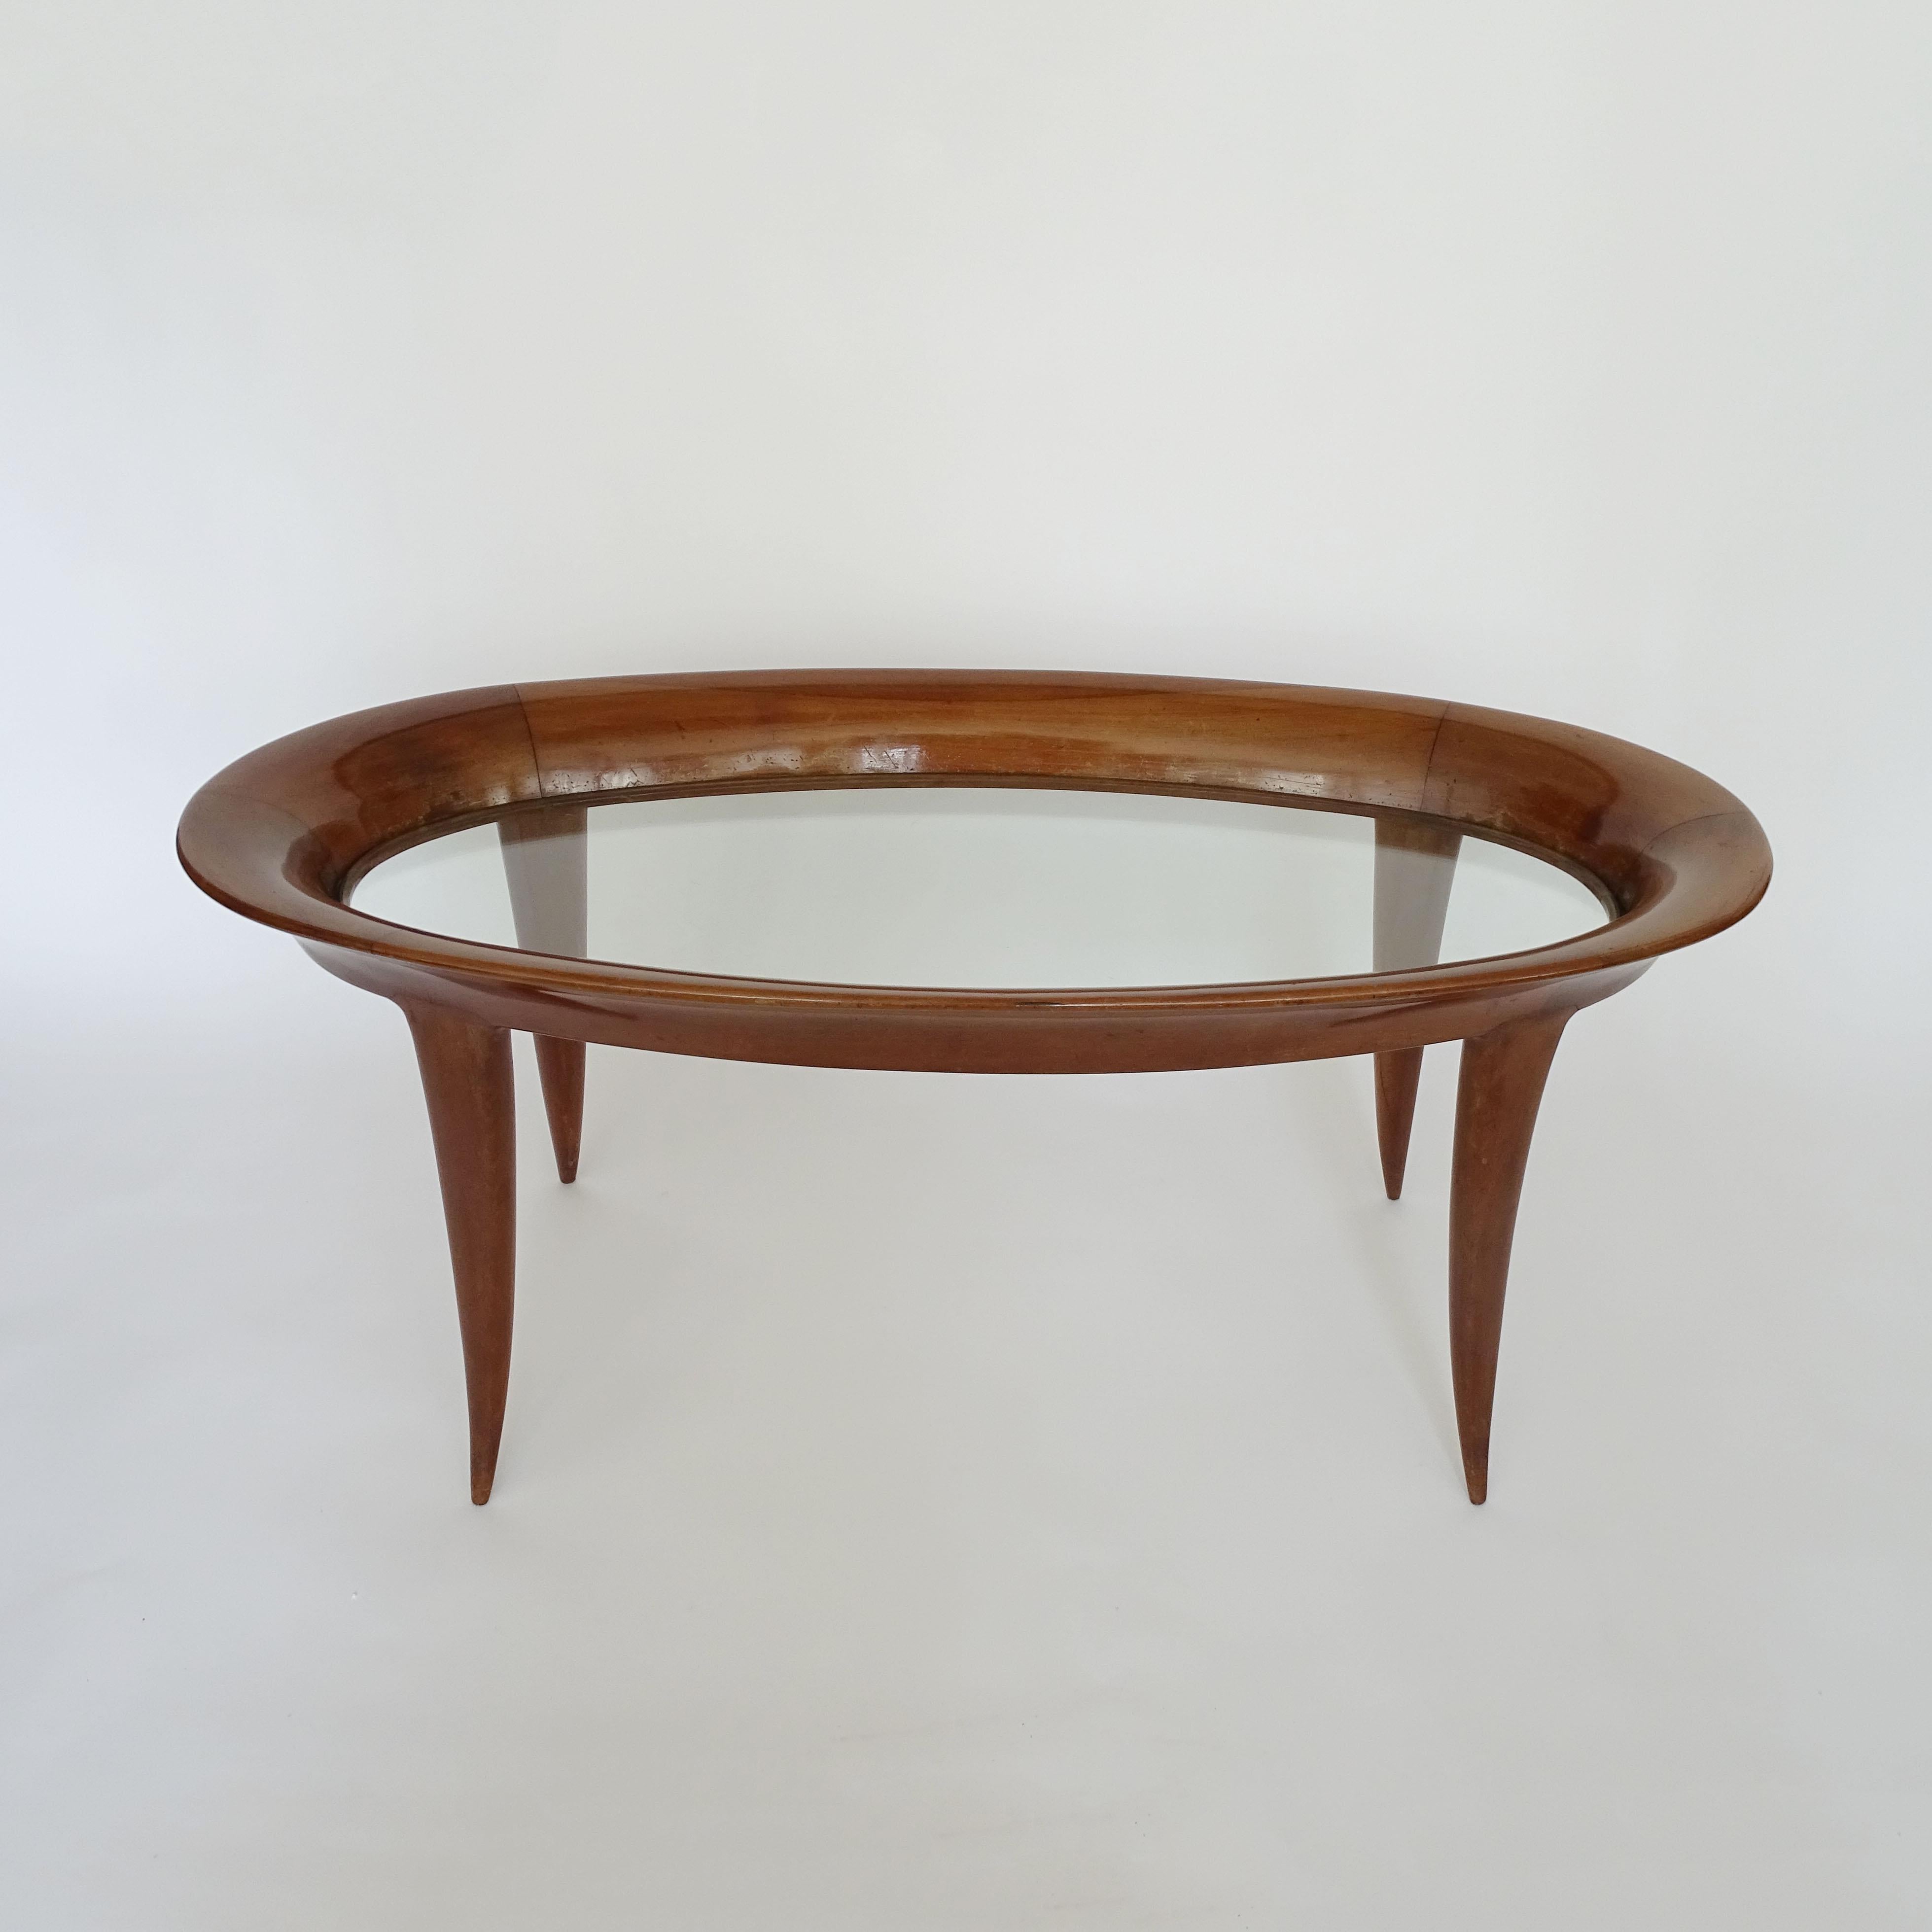 Italian 1940s Sculpted Oval Coffee Table Attributed to Fontana Arte For Sale 2